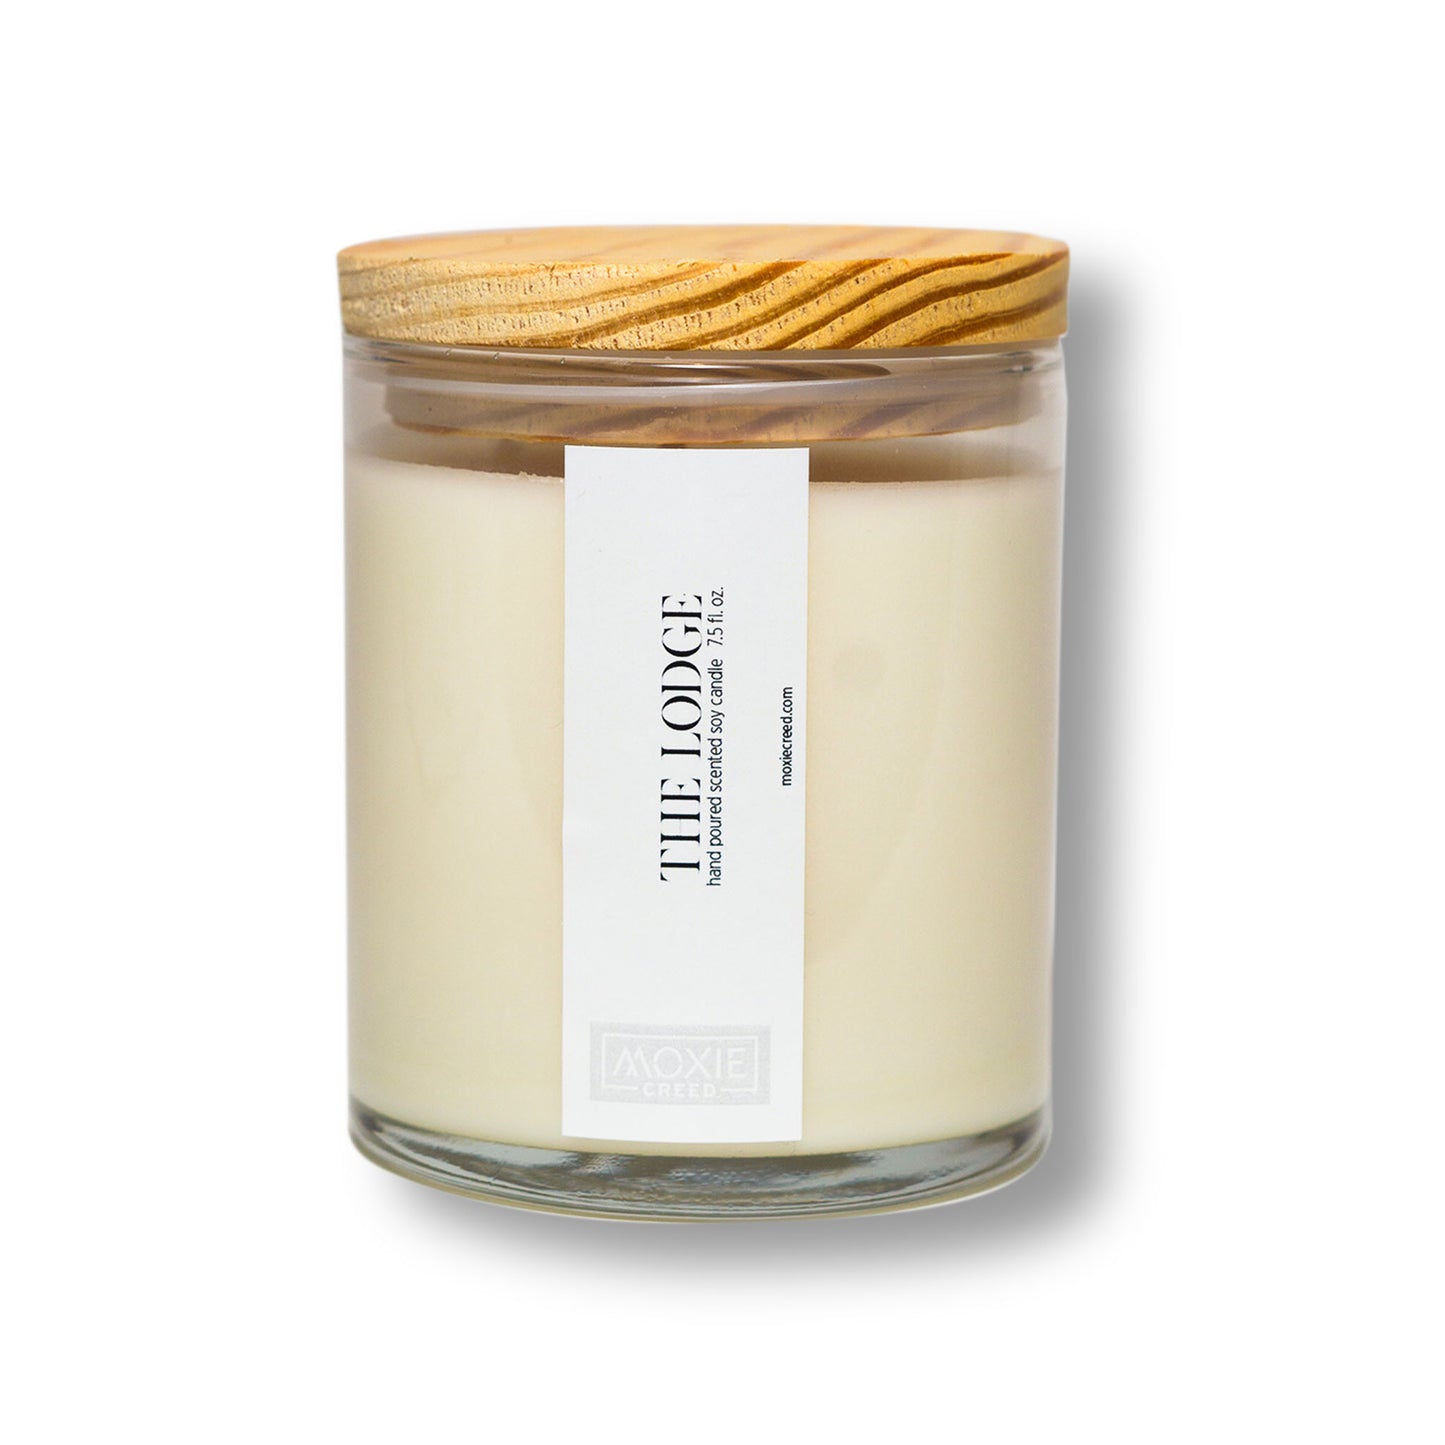 The Lodge Scented Candle